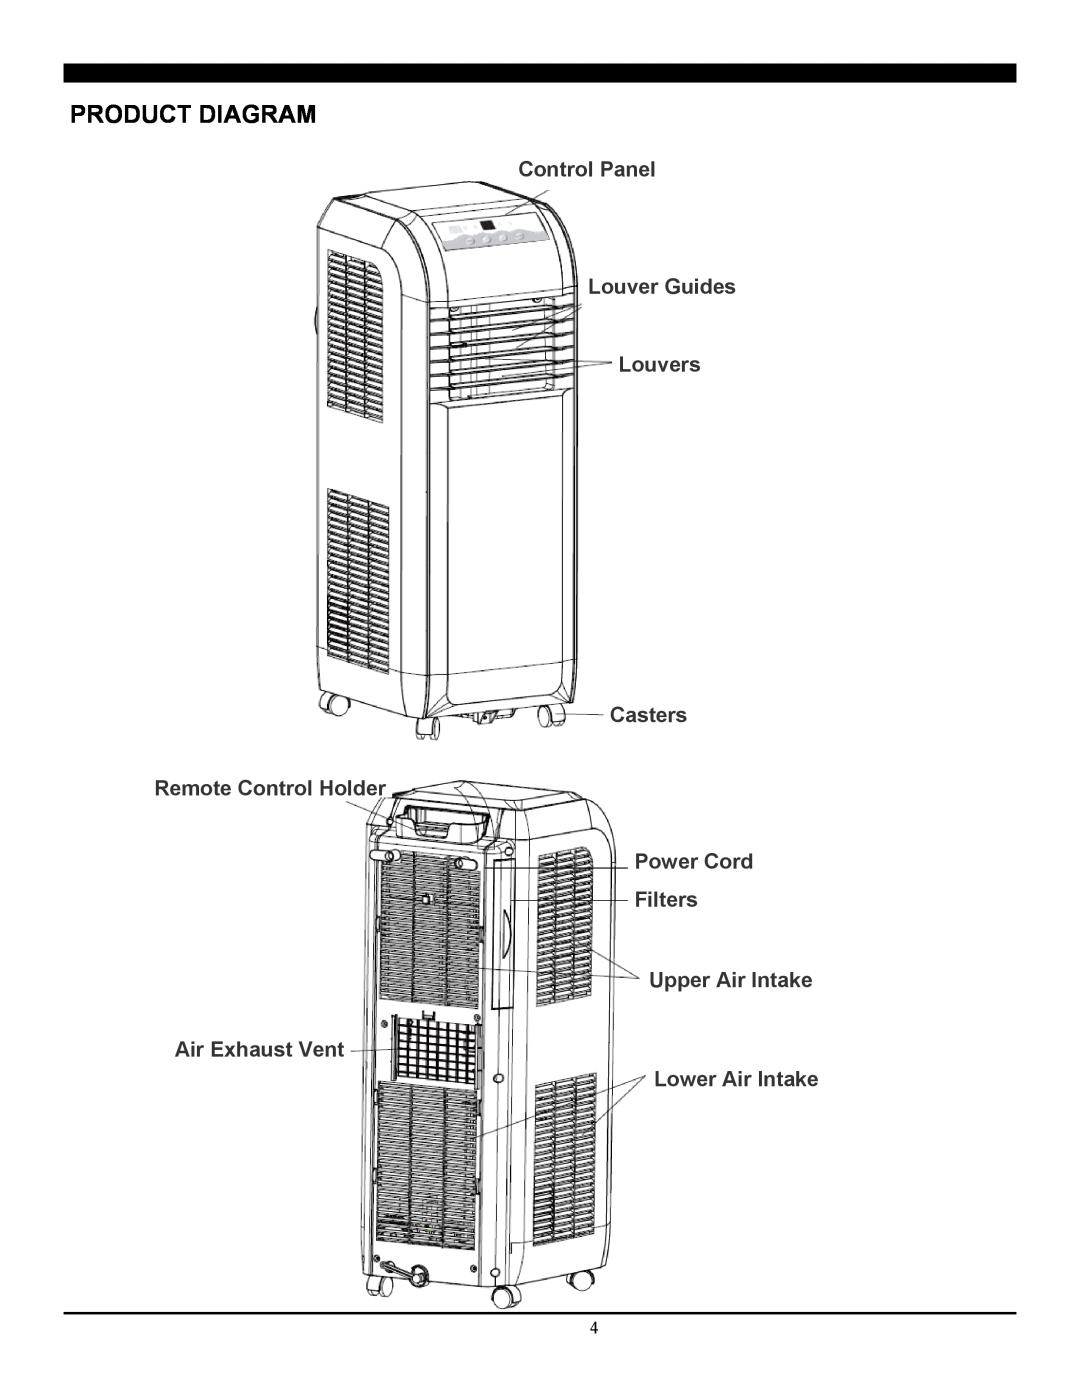 Soleus Air SG-PAC-08E4 Product Diagram, Control Panel Louver Guides Louvers Casters, Upper Air Intake Air Exhaust Vent 